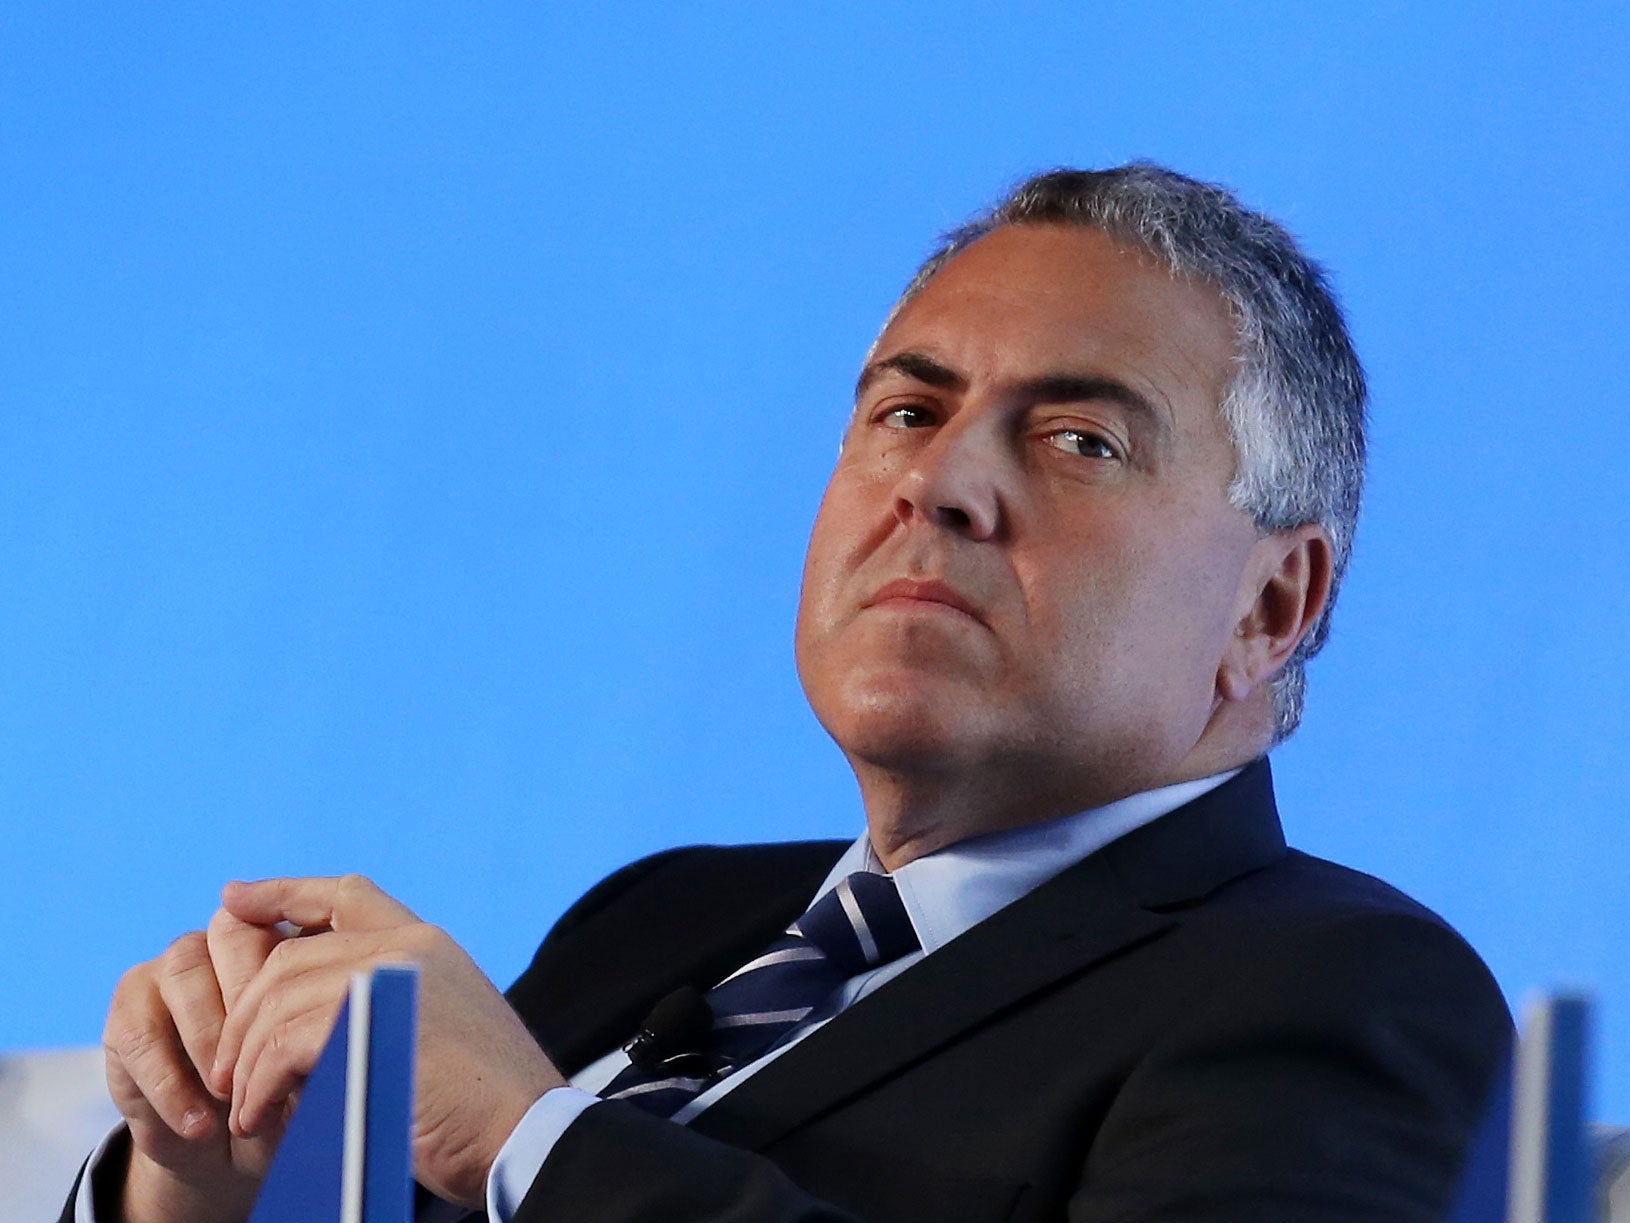 Joe Hockey told a press conference that first-time buyers should simply "get a good job that pays good money" if they wanted to buy a house, despite the out of control property prices in Australia's big cities